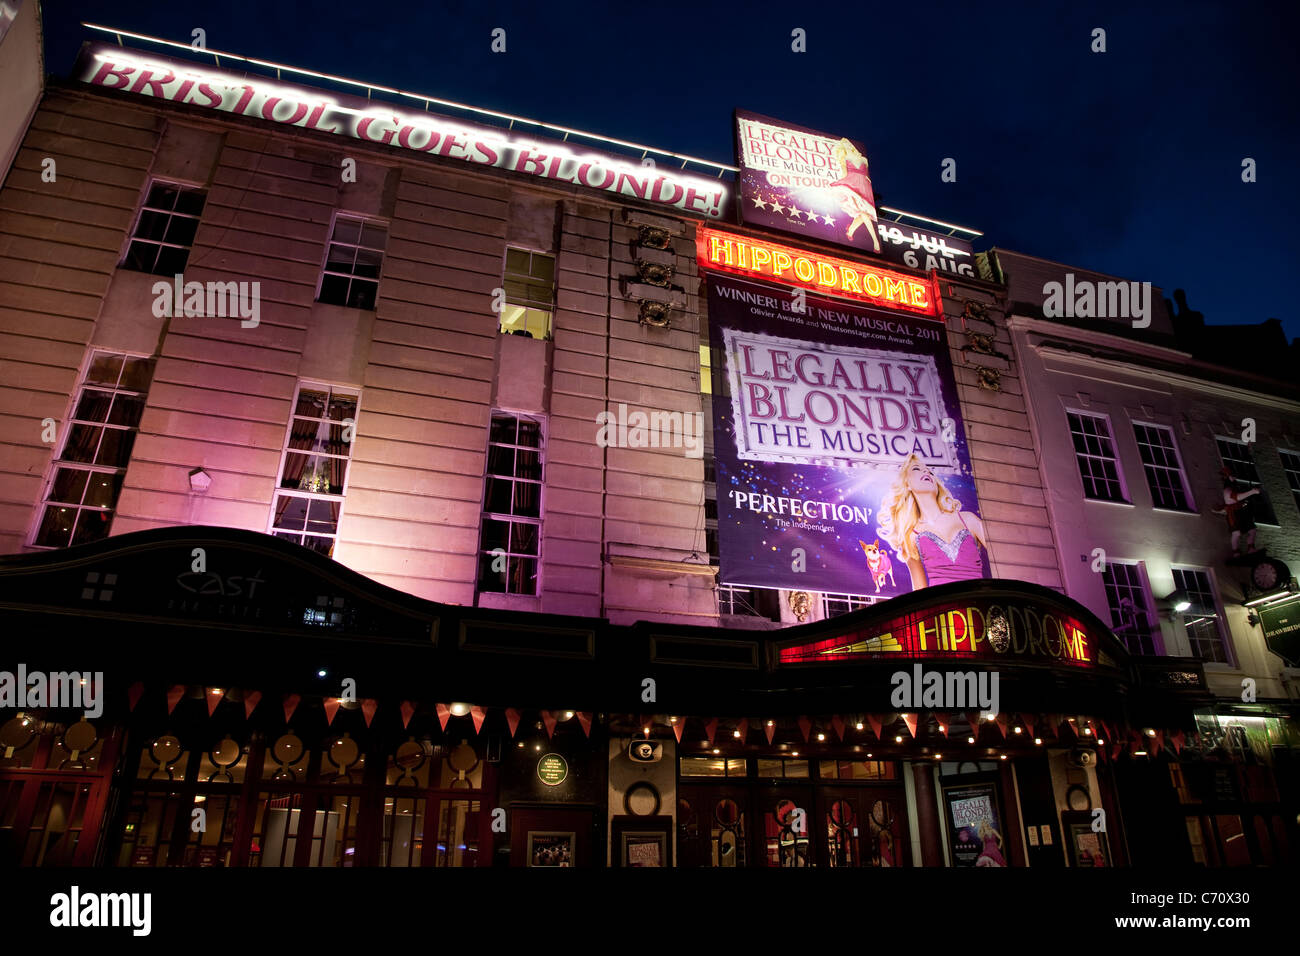 Legally Blonde at the Hippodrome Theatre in Bristol, England, UK Stock Photo